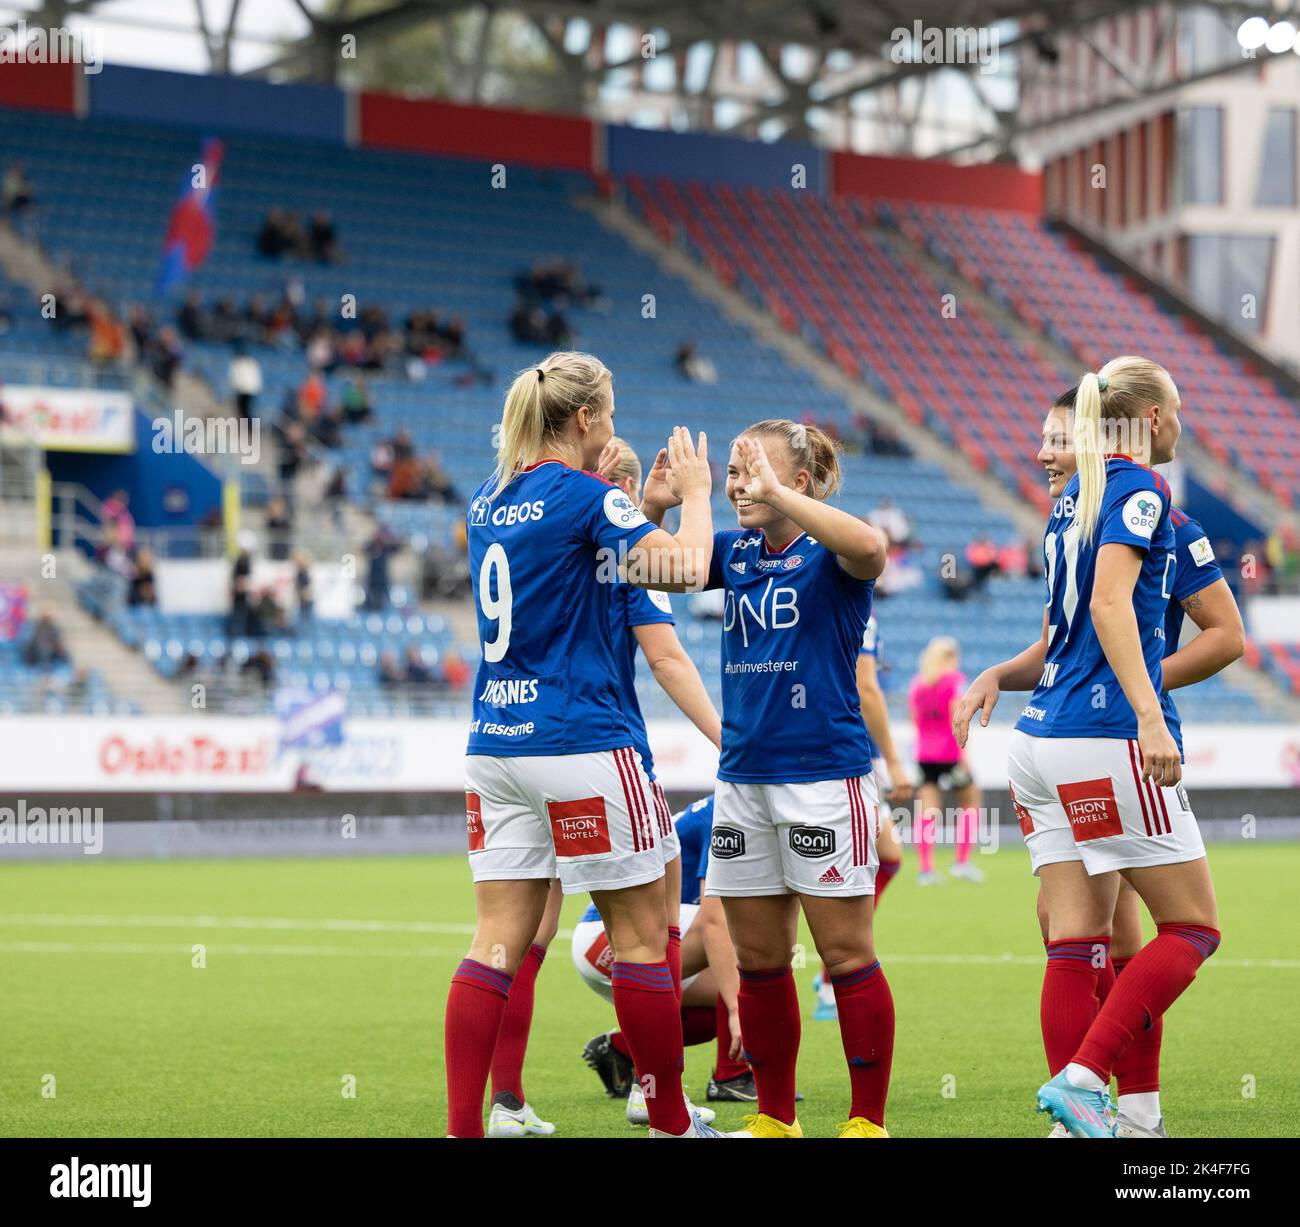 Oslo, Norway. 02nd Oct, 2022. Oslo, Norway, October 2nd 2022: Elise Thorsnes (9 Valerenga) celebrates after scoring her goal number 200 in Toppserien during the playoff game in Toppserien between Valerenga and Rosenborg at Intility Arena in Oslo, Norway (Ane Frosaker/SPP) Credit: SPP Sport Press Photo. /Alamy Live News Stock Photo